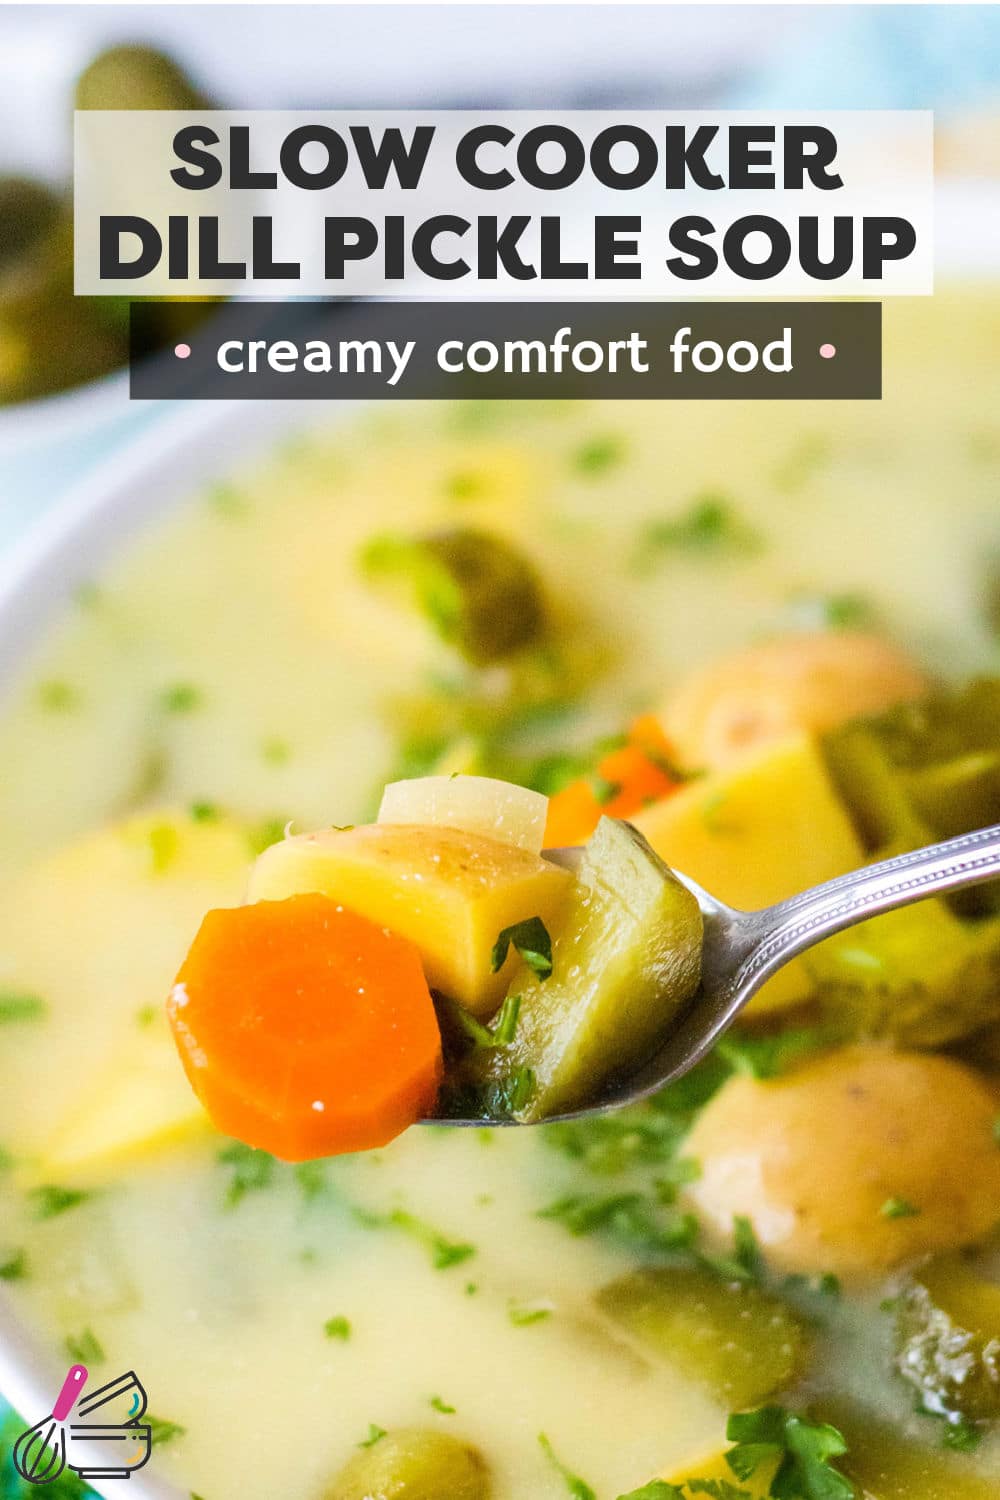 This zesty slow cooker dill pickle soup is made with chunks of potatoes, carrots, celery, and of course dill pickles! Cooked low and slow in the crockpot in a thick and creamy broth, this hearty comfort soup is definitely worthy of the hype! | www.persnicketyplates.com